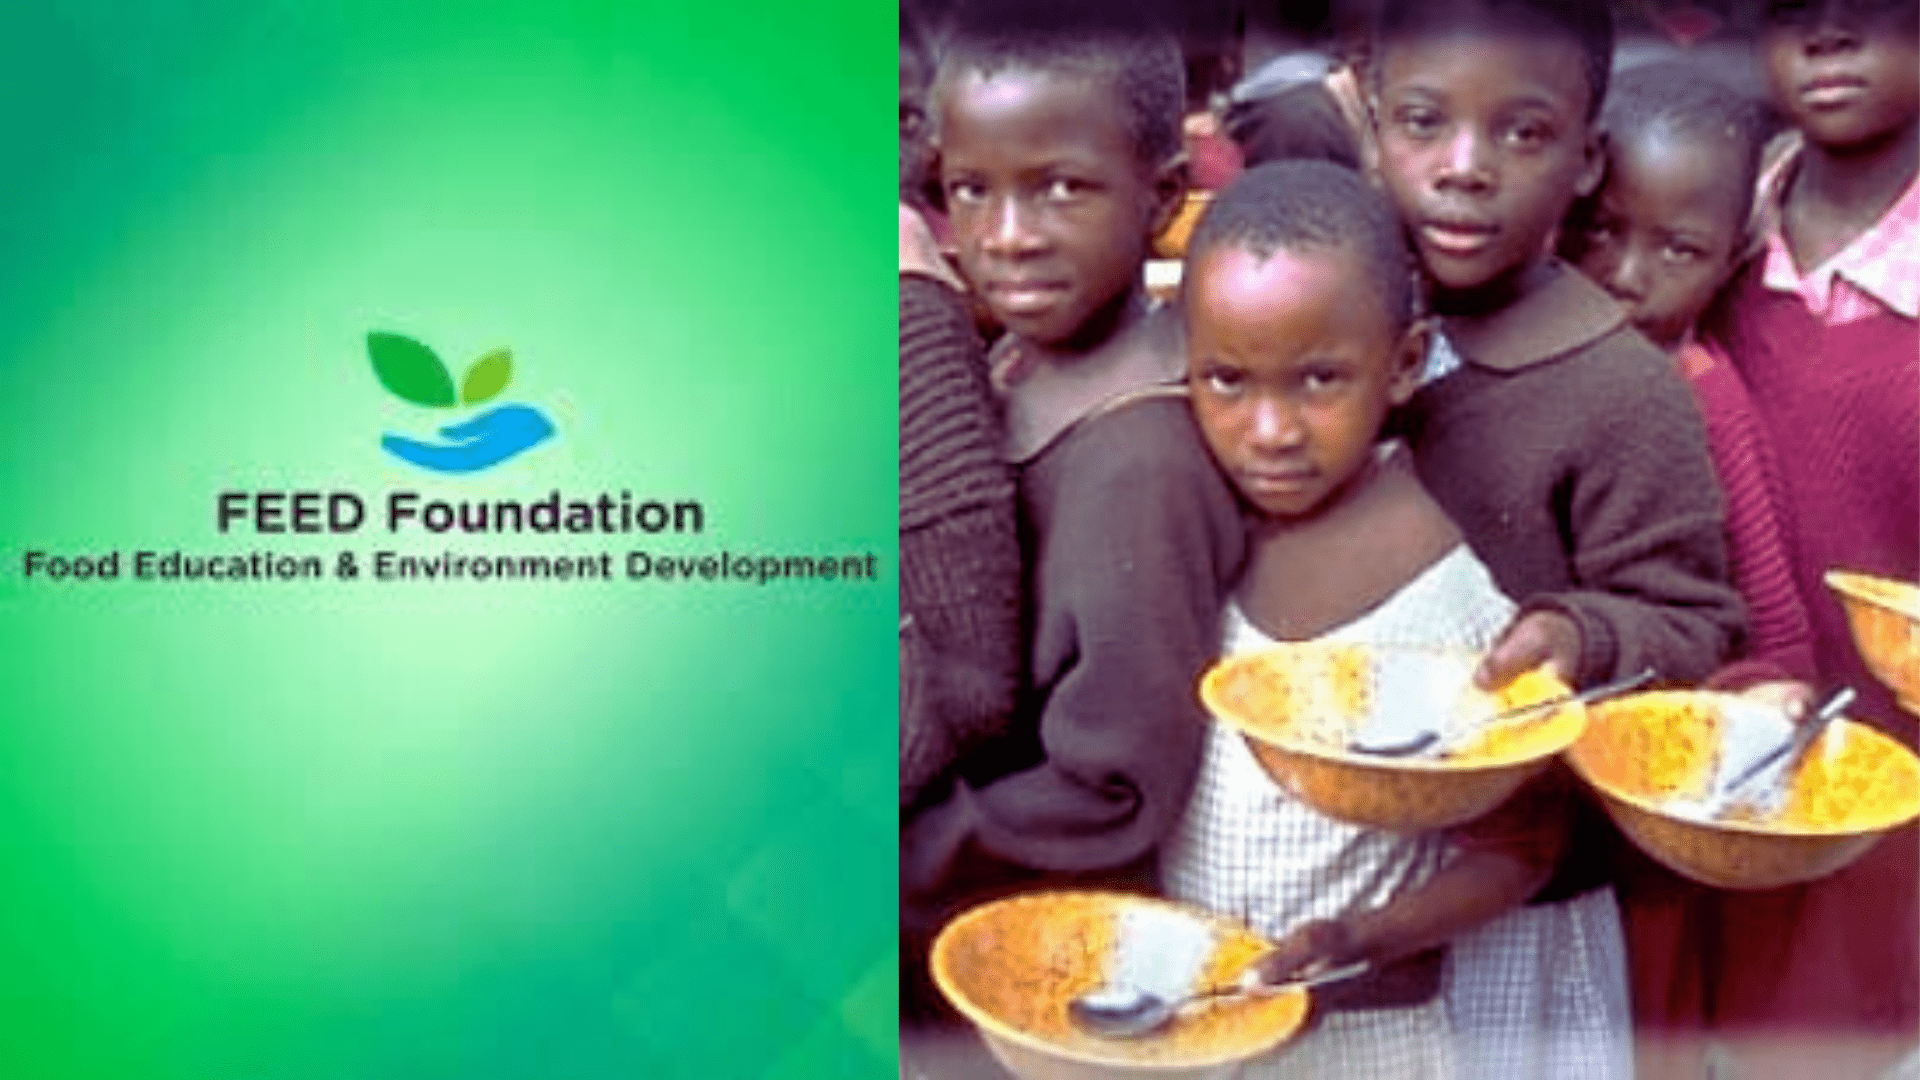 What is the Feed Foundation